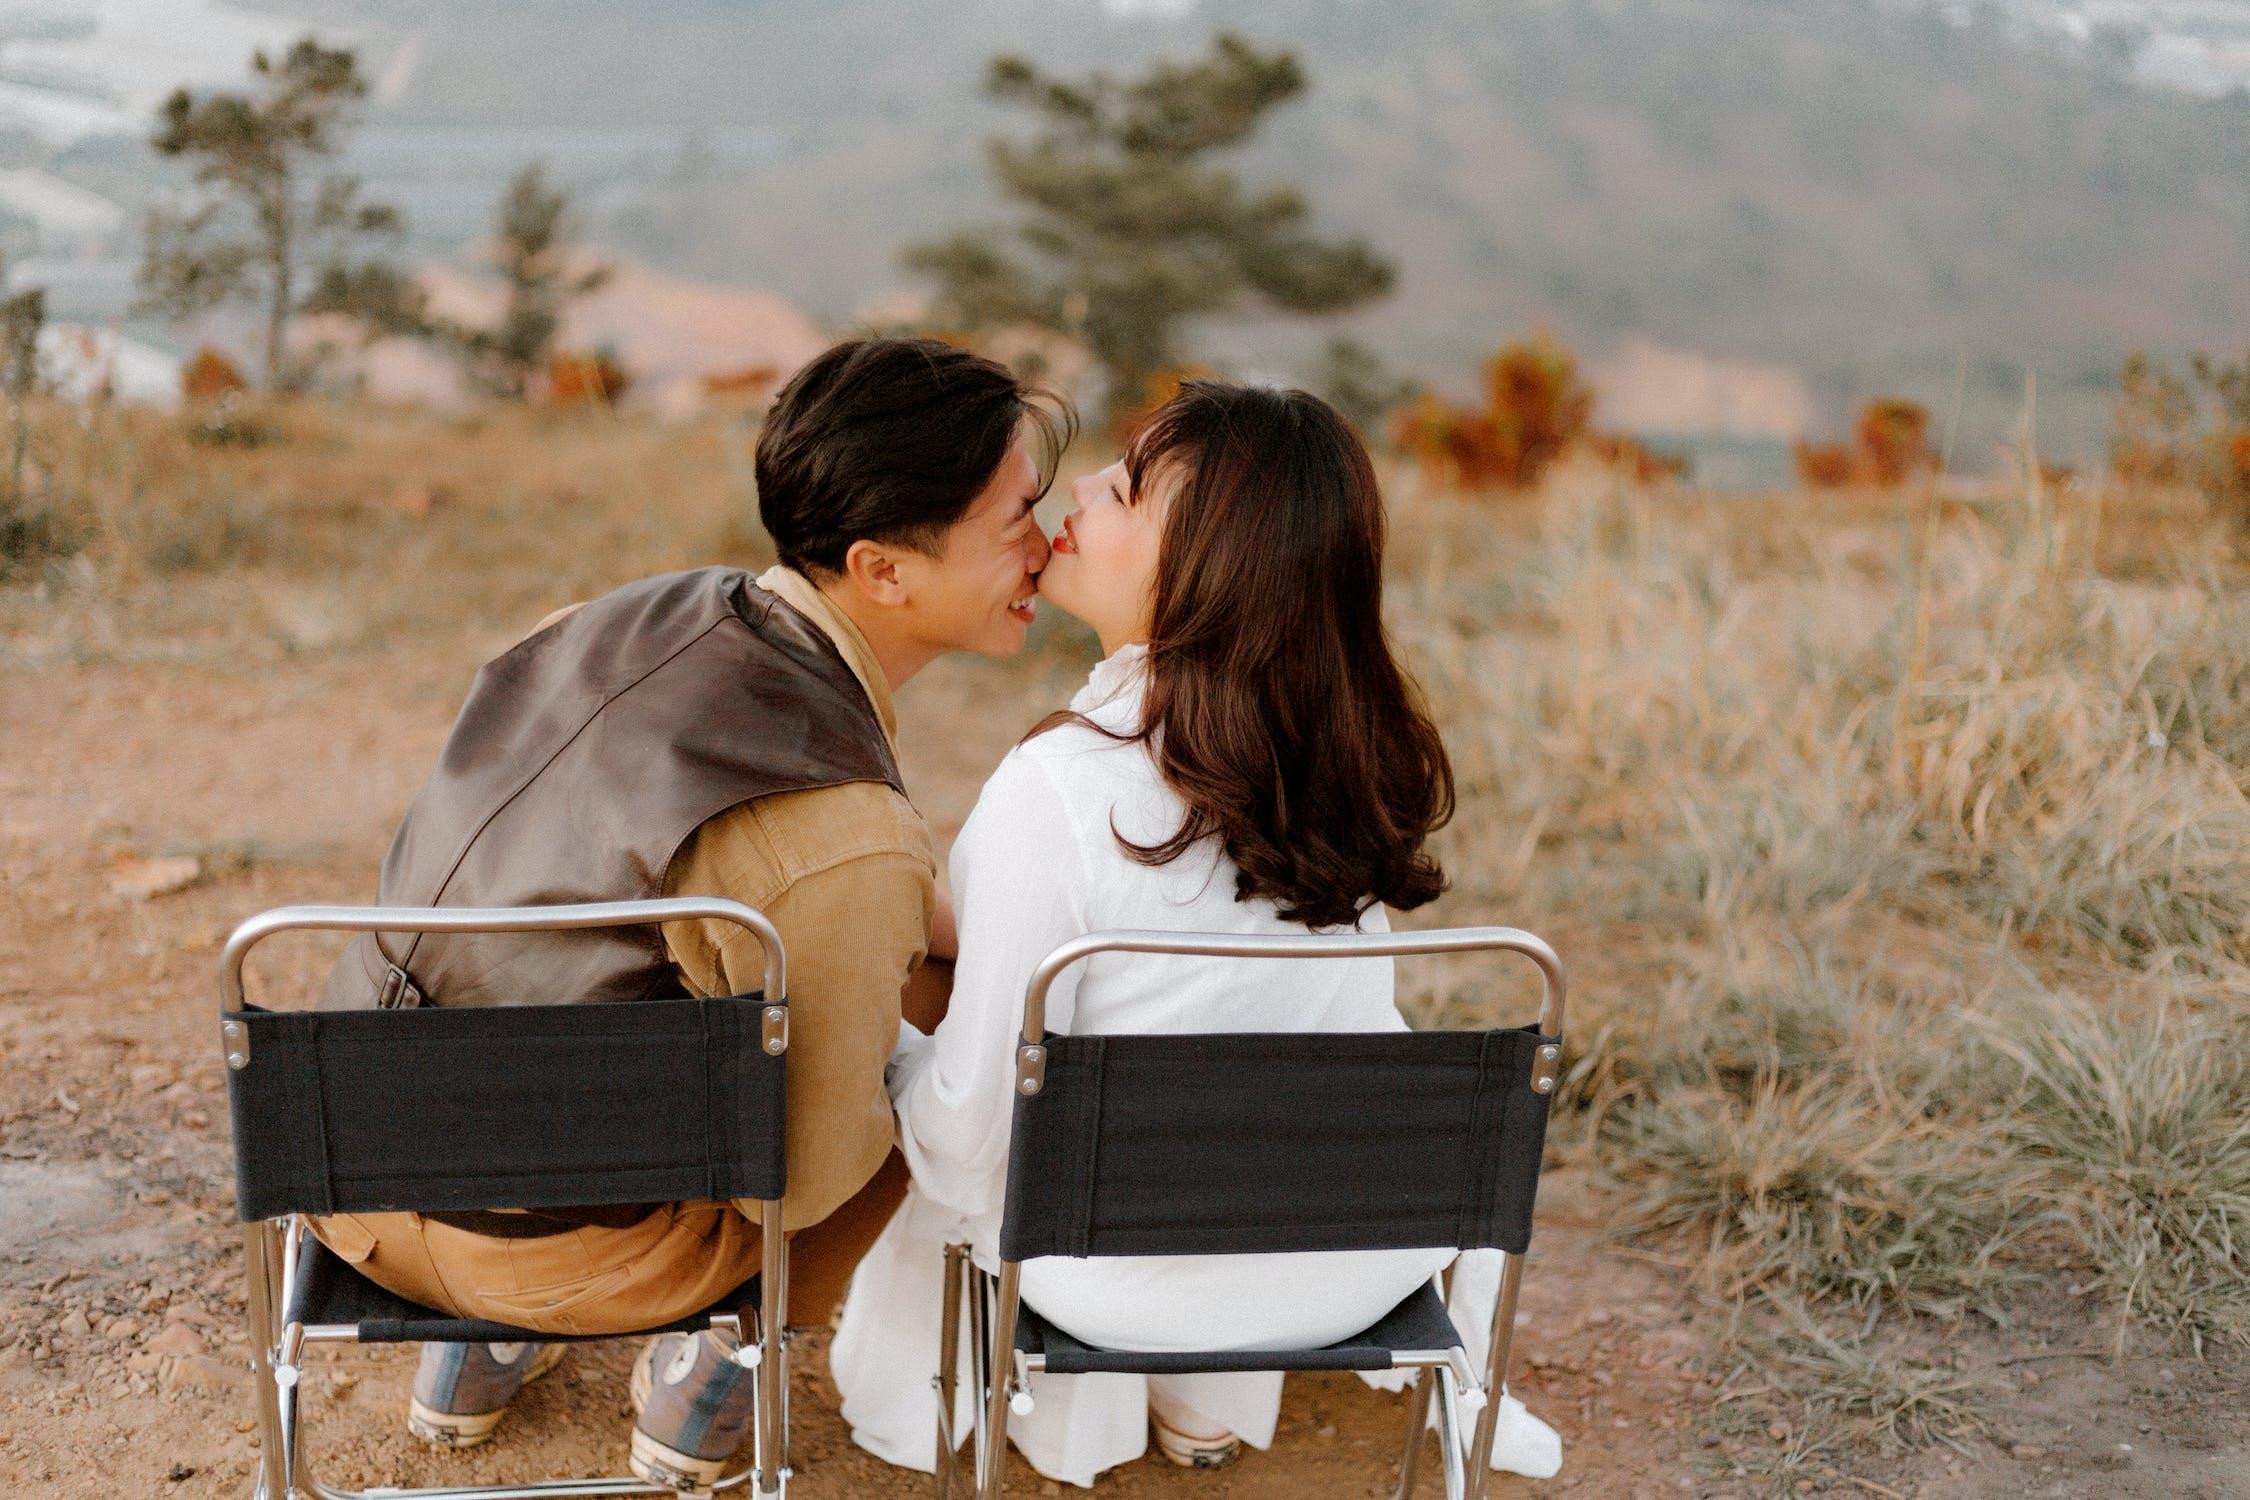 6 Tips for Capturing the Essence of Your Love Story on Camera